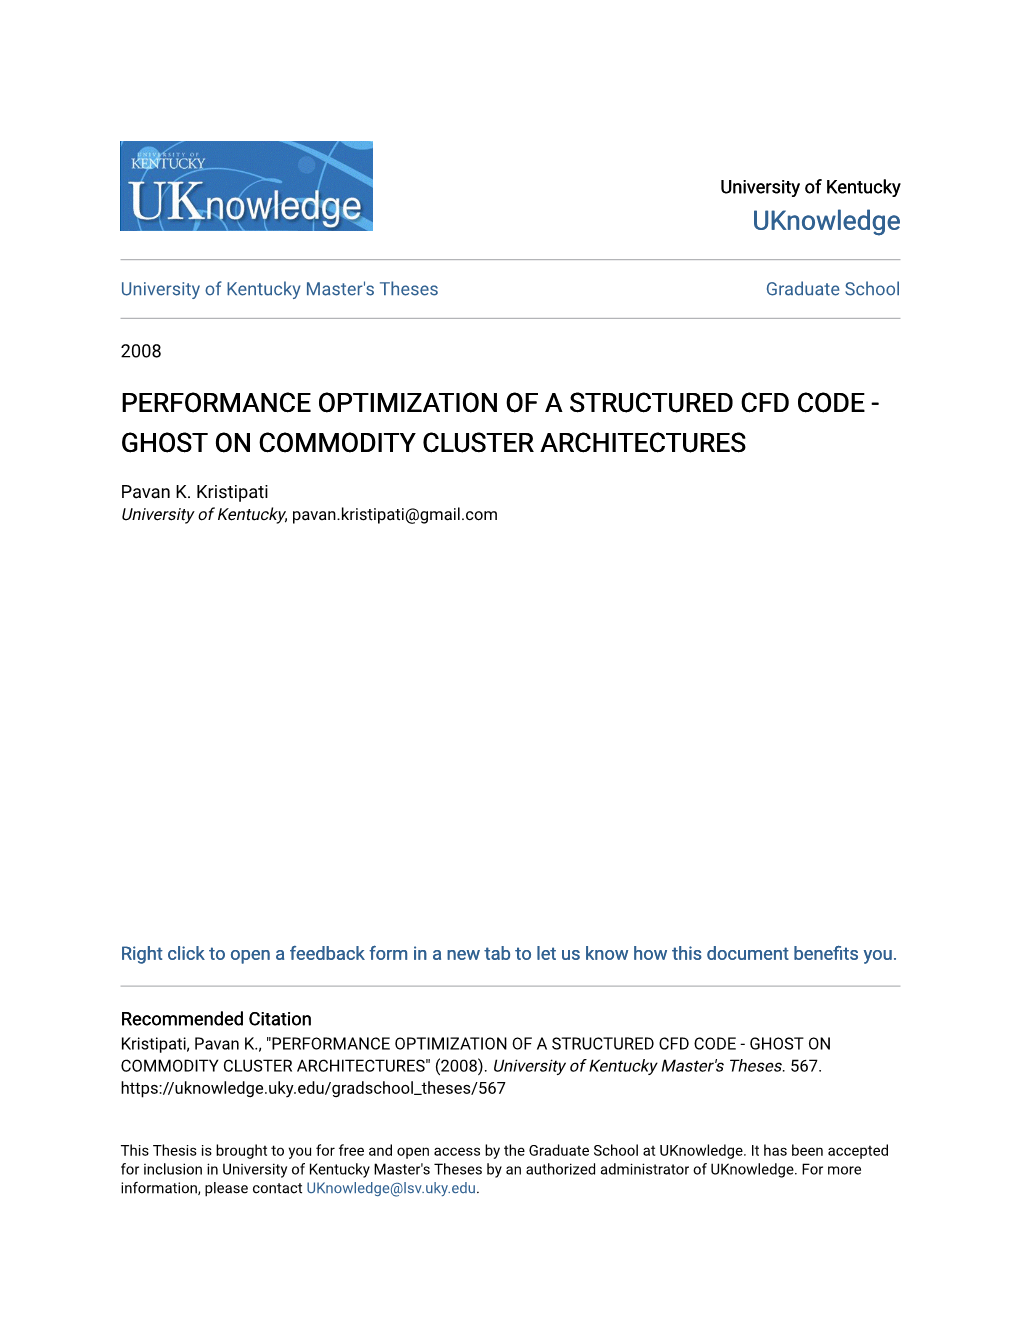 Performance Optimization of a Structured Cfd Code - Ghost on Commodity Cluster Architectures